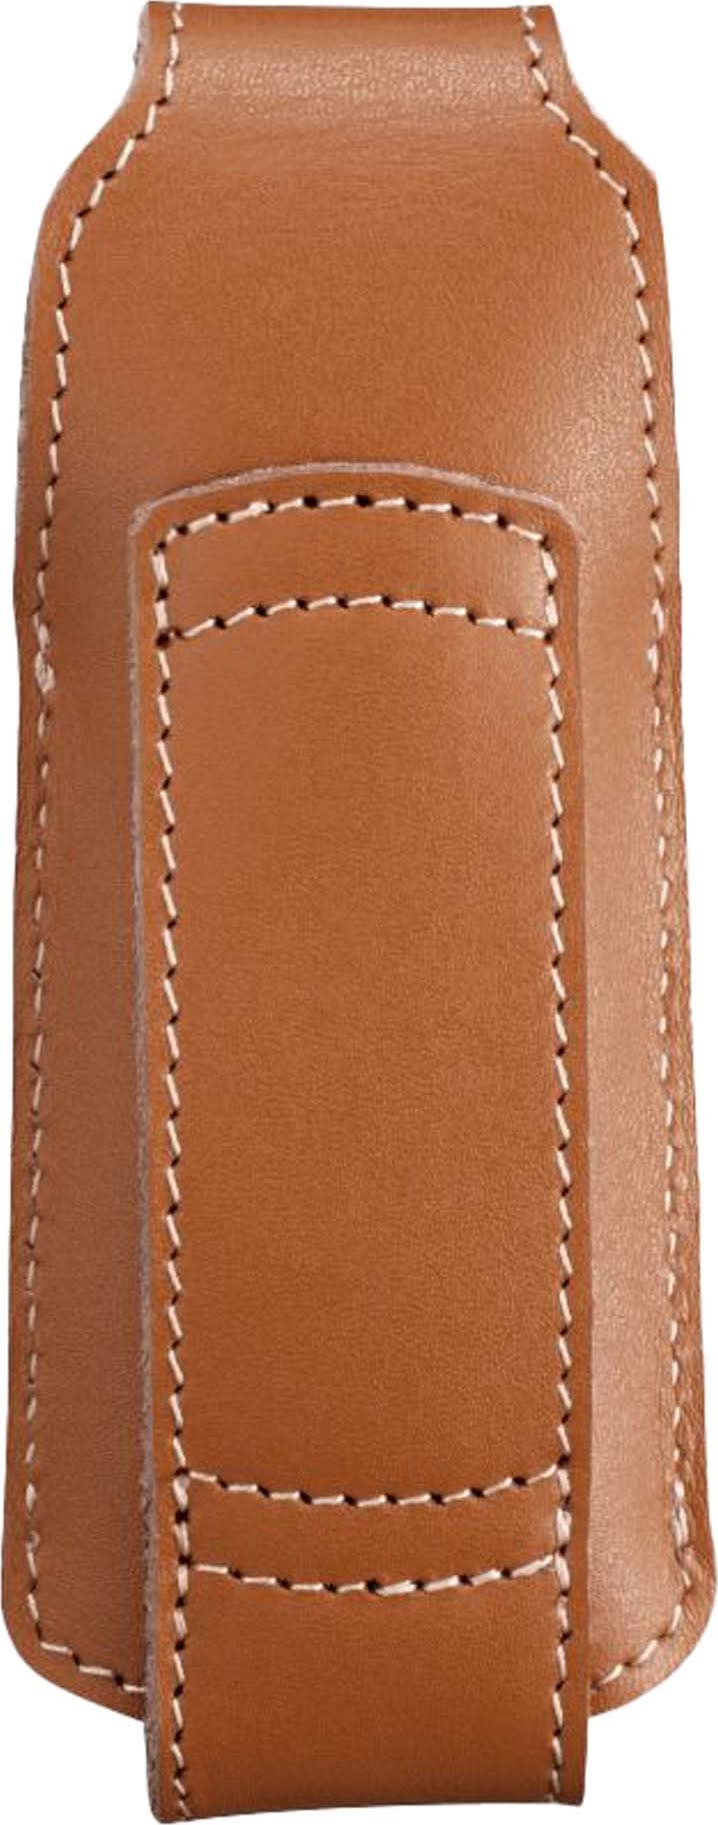 Leather Sheath Chic Brown Brown Opinel